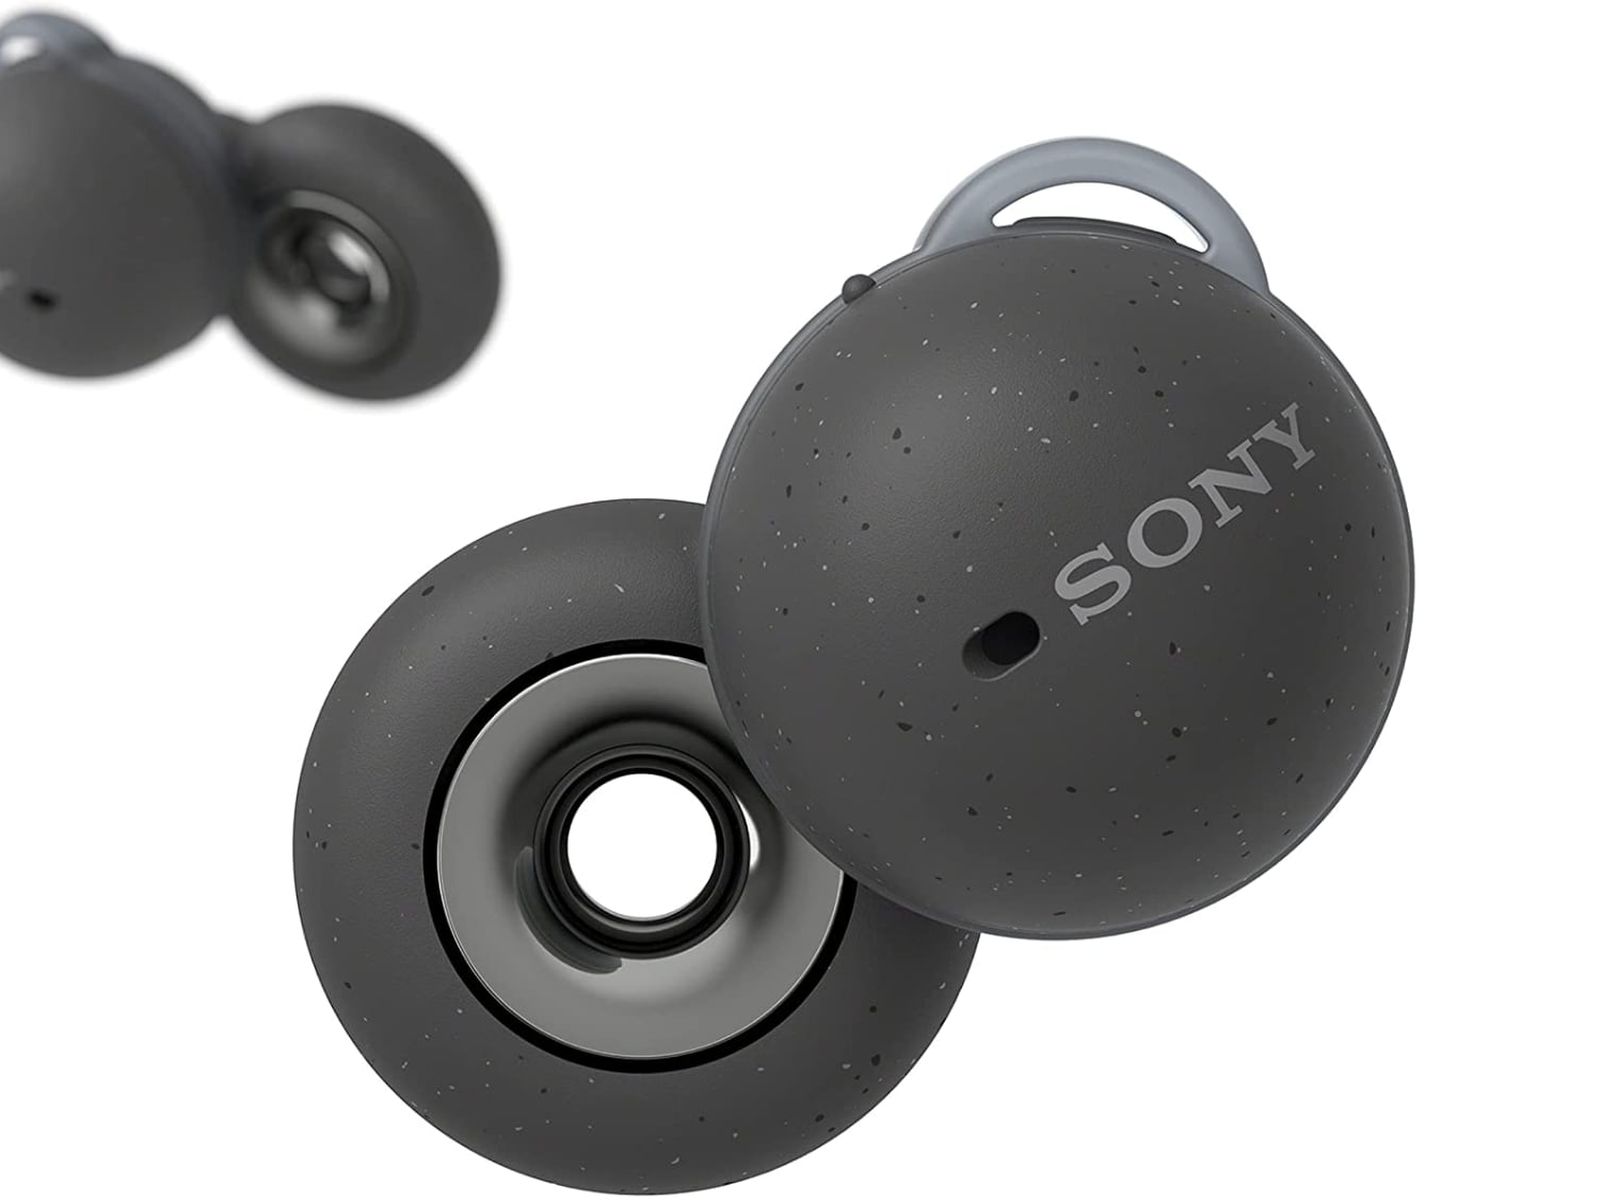 Sony Announces 'LinkBuds' With Open Design to Let in Ambient Sound 